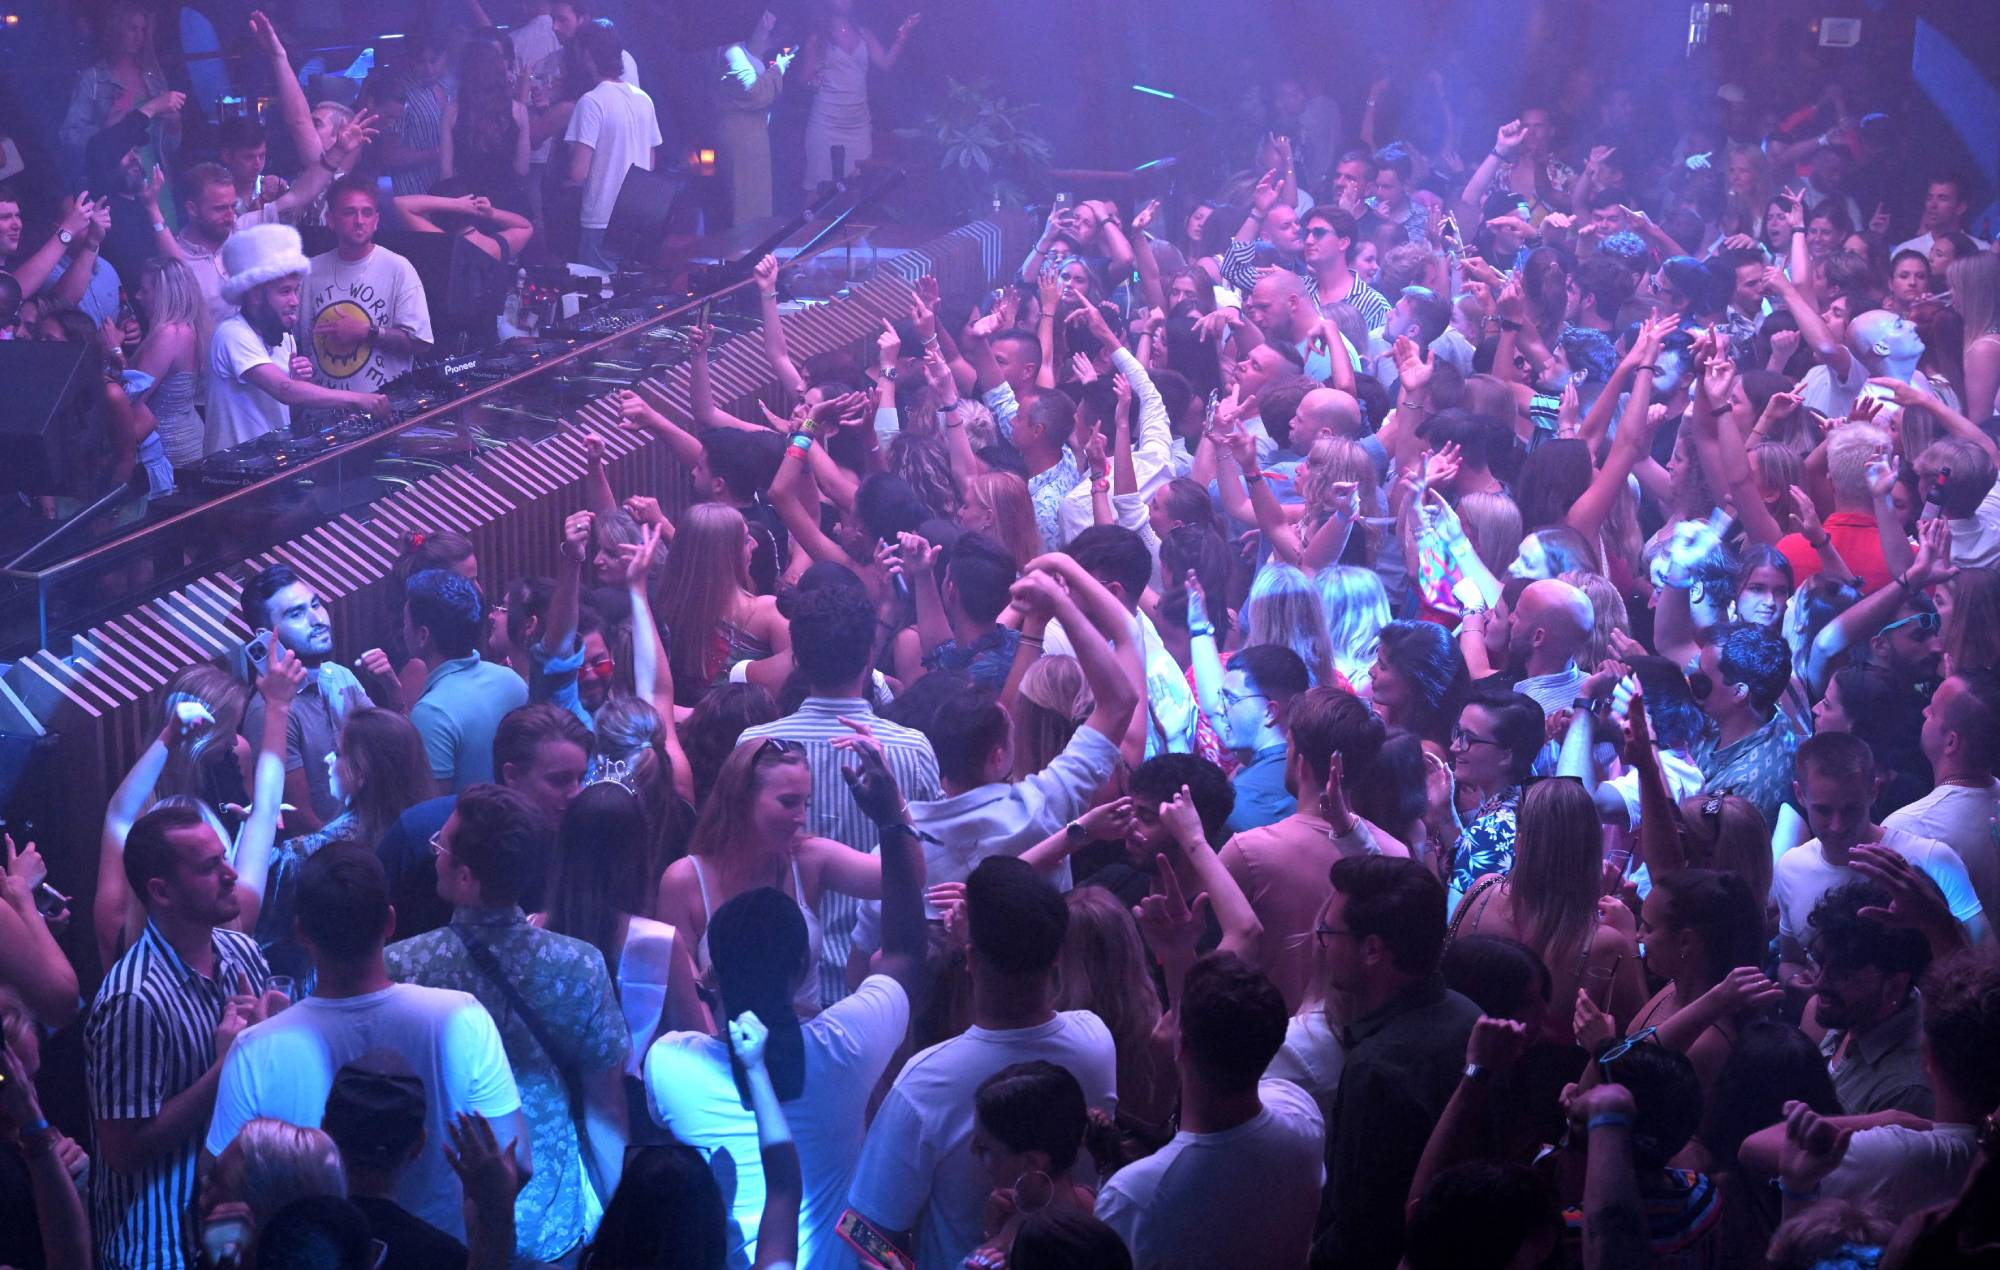 People party at the Pacha Ibiza nightclub in Ibiza, on June 16, 2022. Credit: LLUIS GENE/AFP via Getty Images